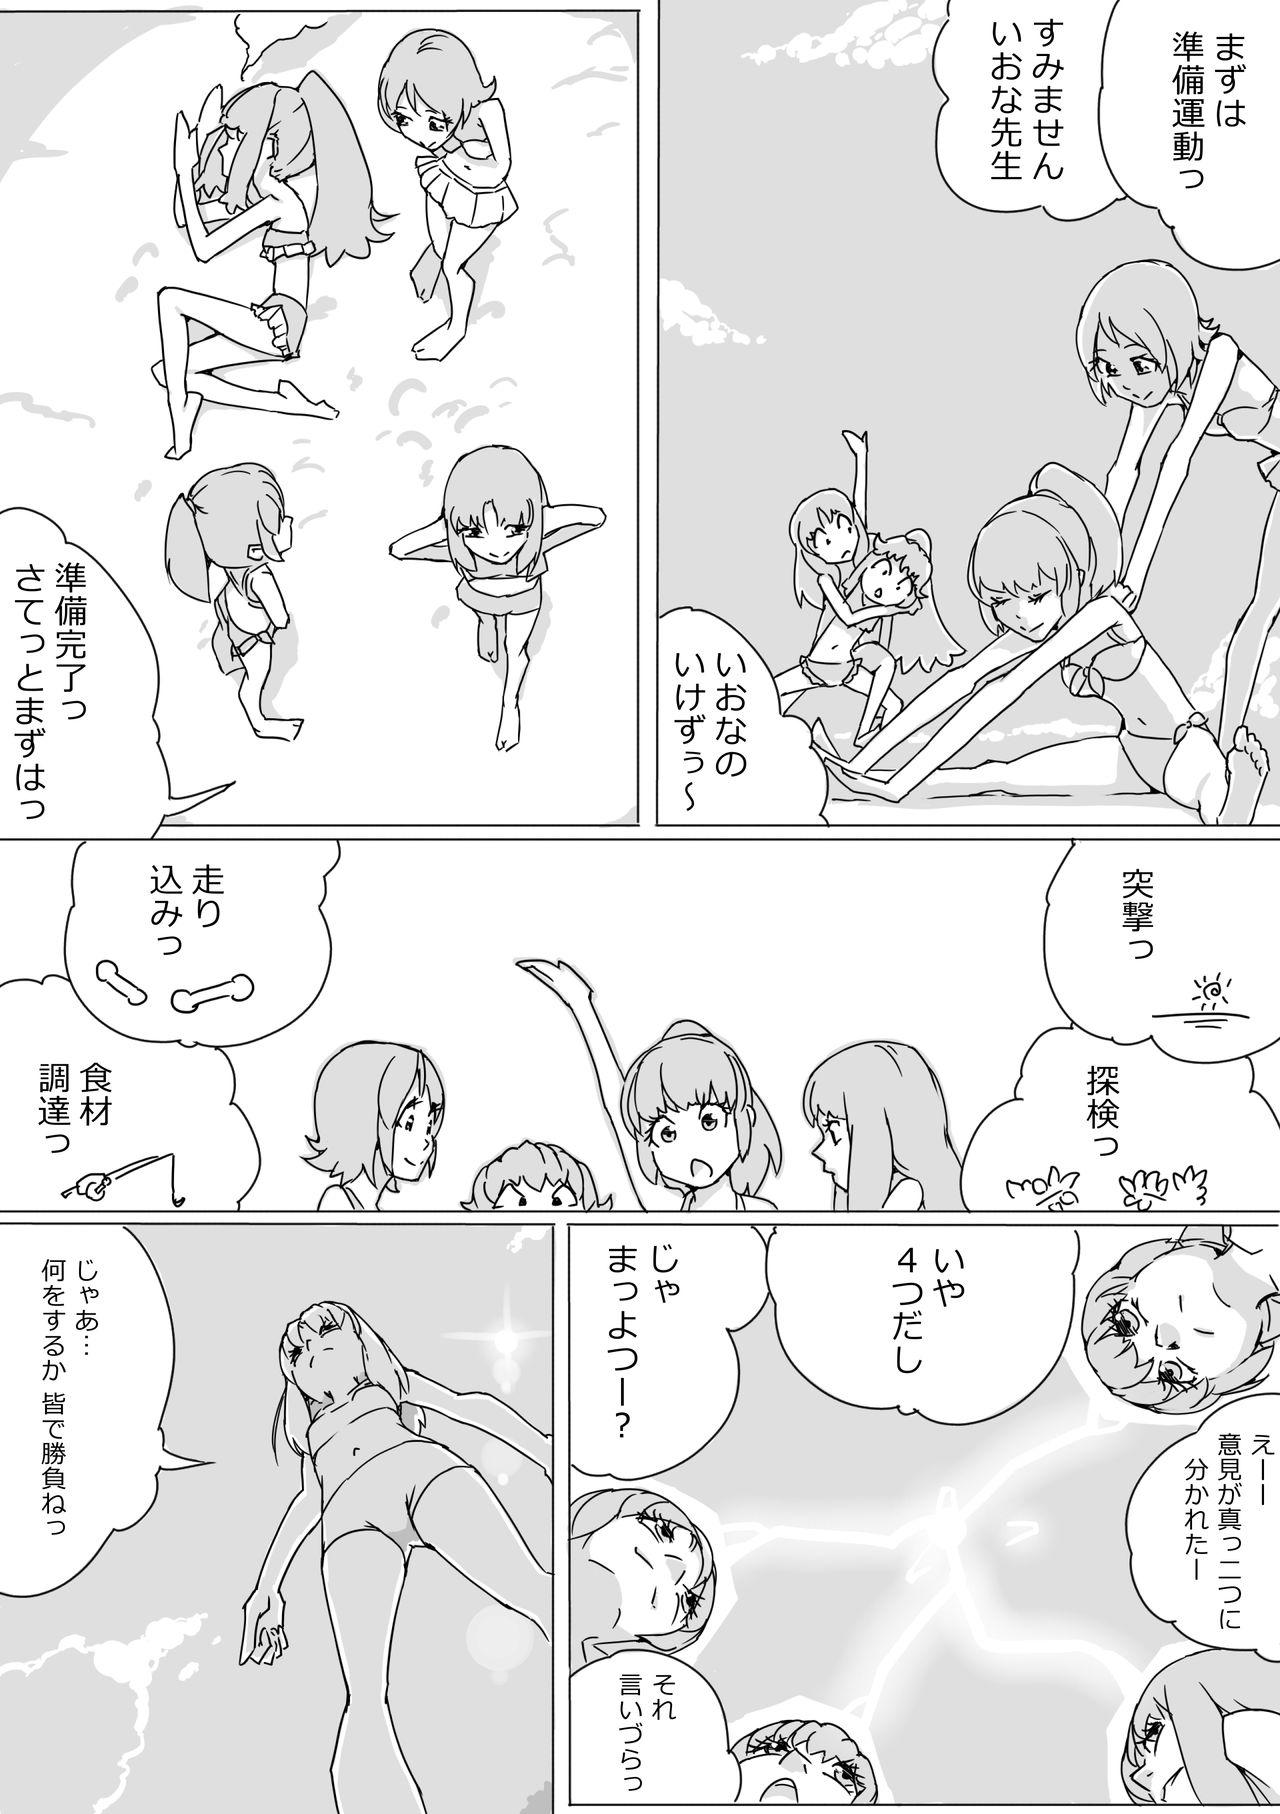 Real Amateur Untitled Precure Doujinshi - Pretty cure Euro - Page 3